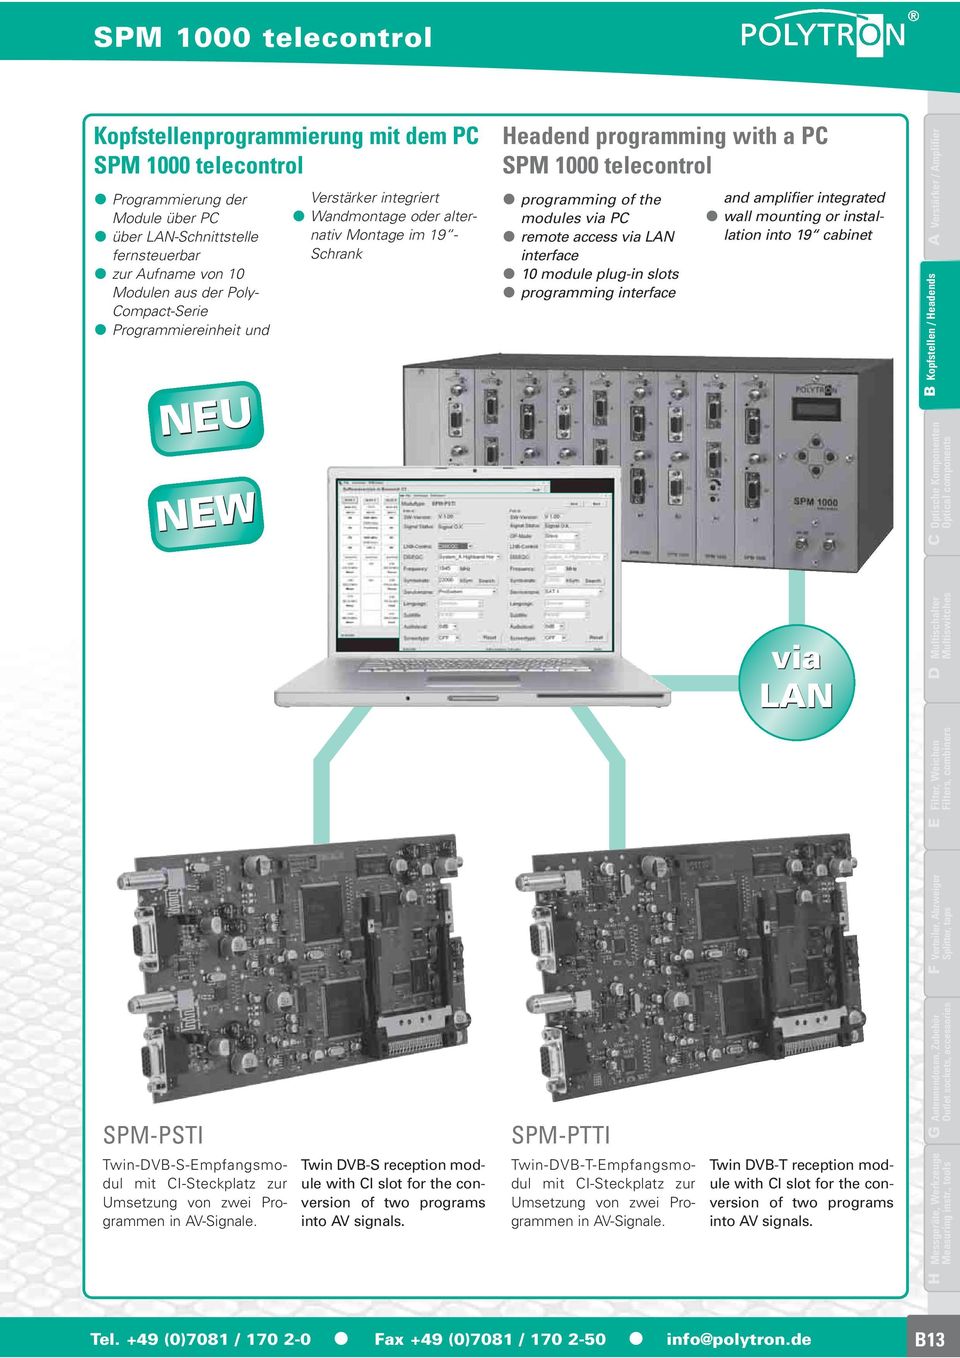 via PC remote access via LAN interface 10 module plug-in slots programming interface and amplifier integrated wall mounting or installation into 19 cabinet via LAN SPM-PSTI SPM-PTTI